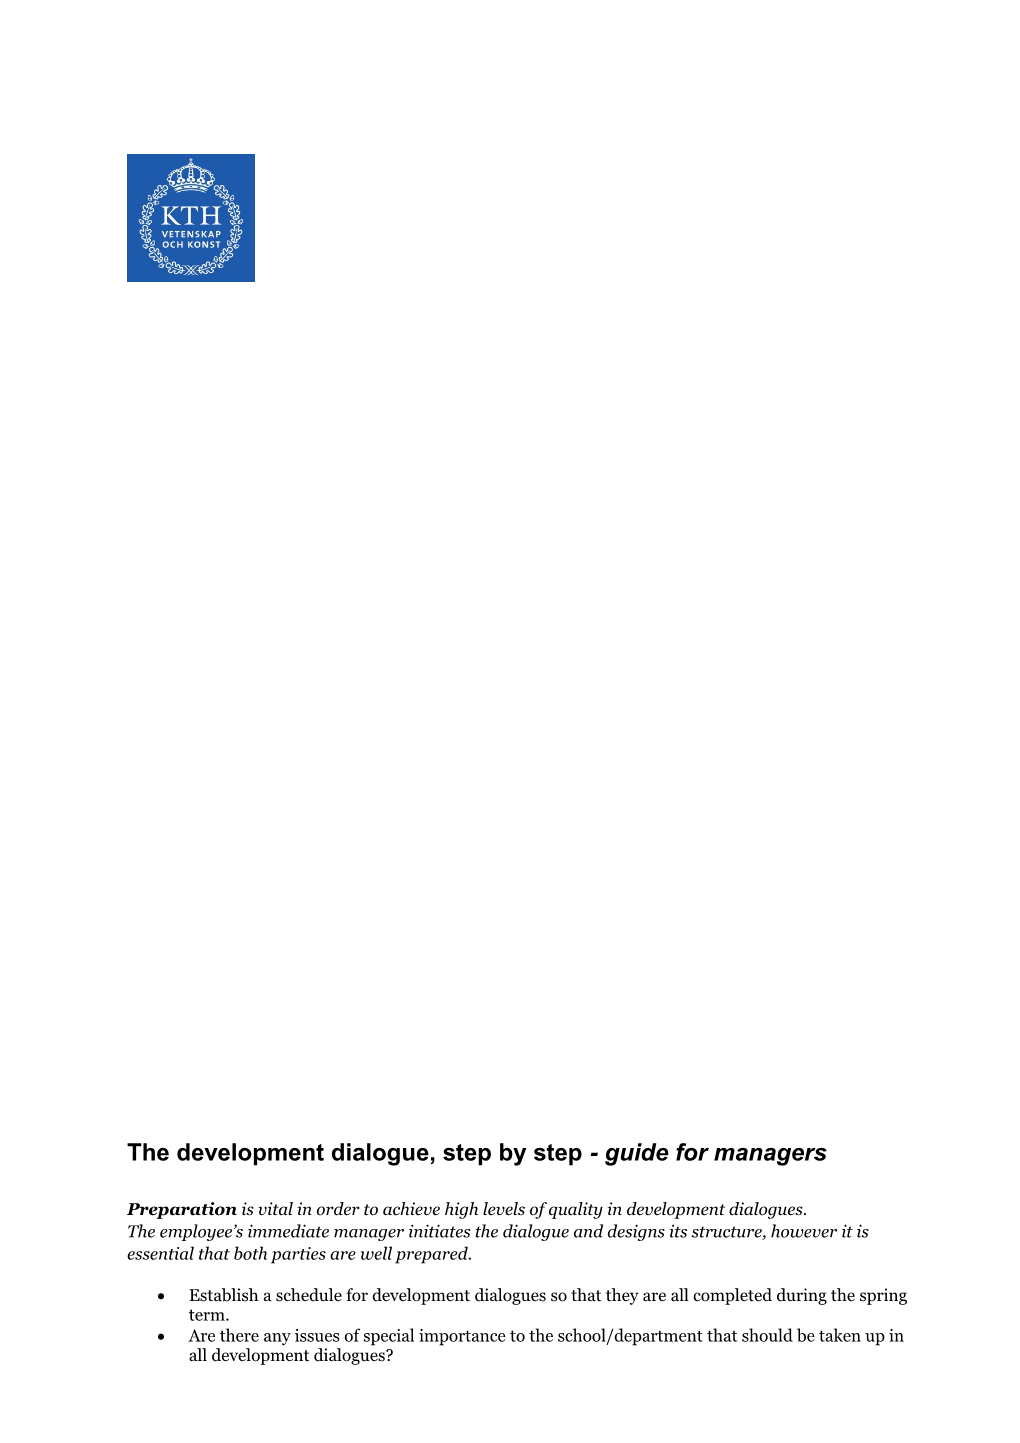 The Development Dialogue, Step by Step - Guide for Managers